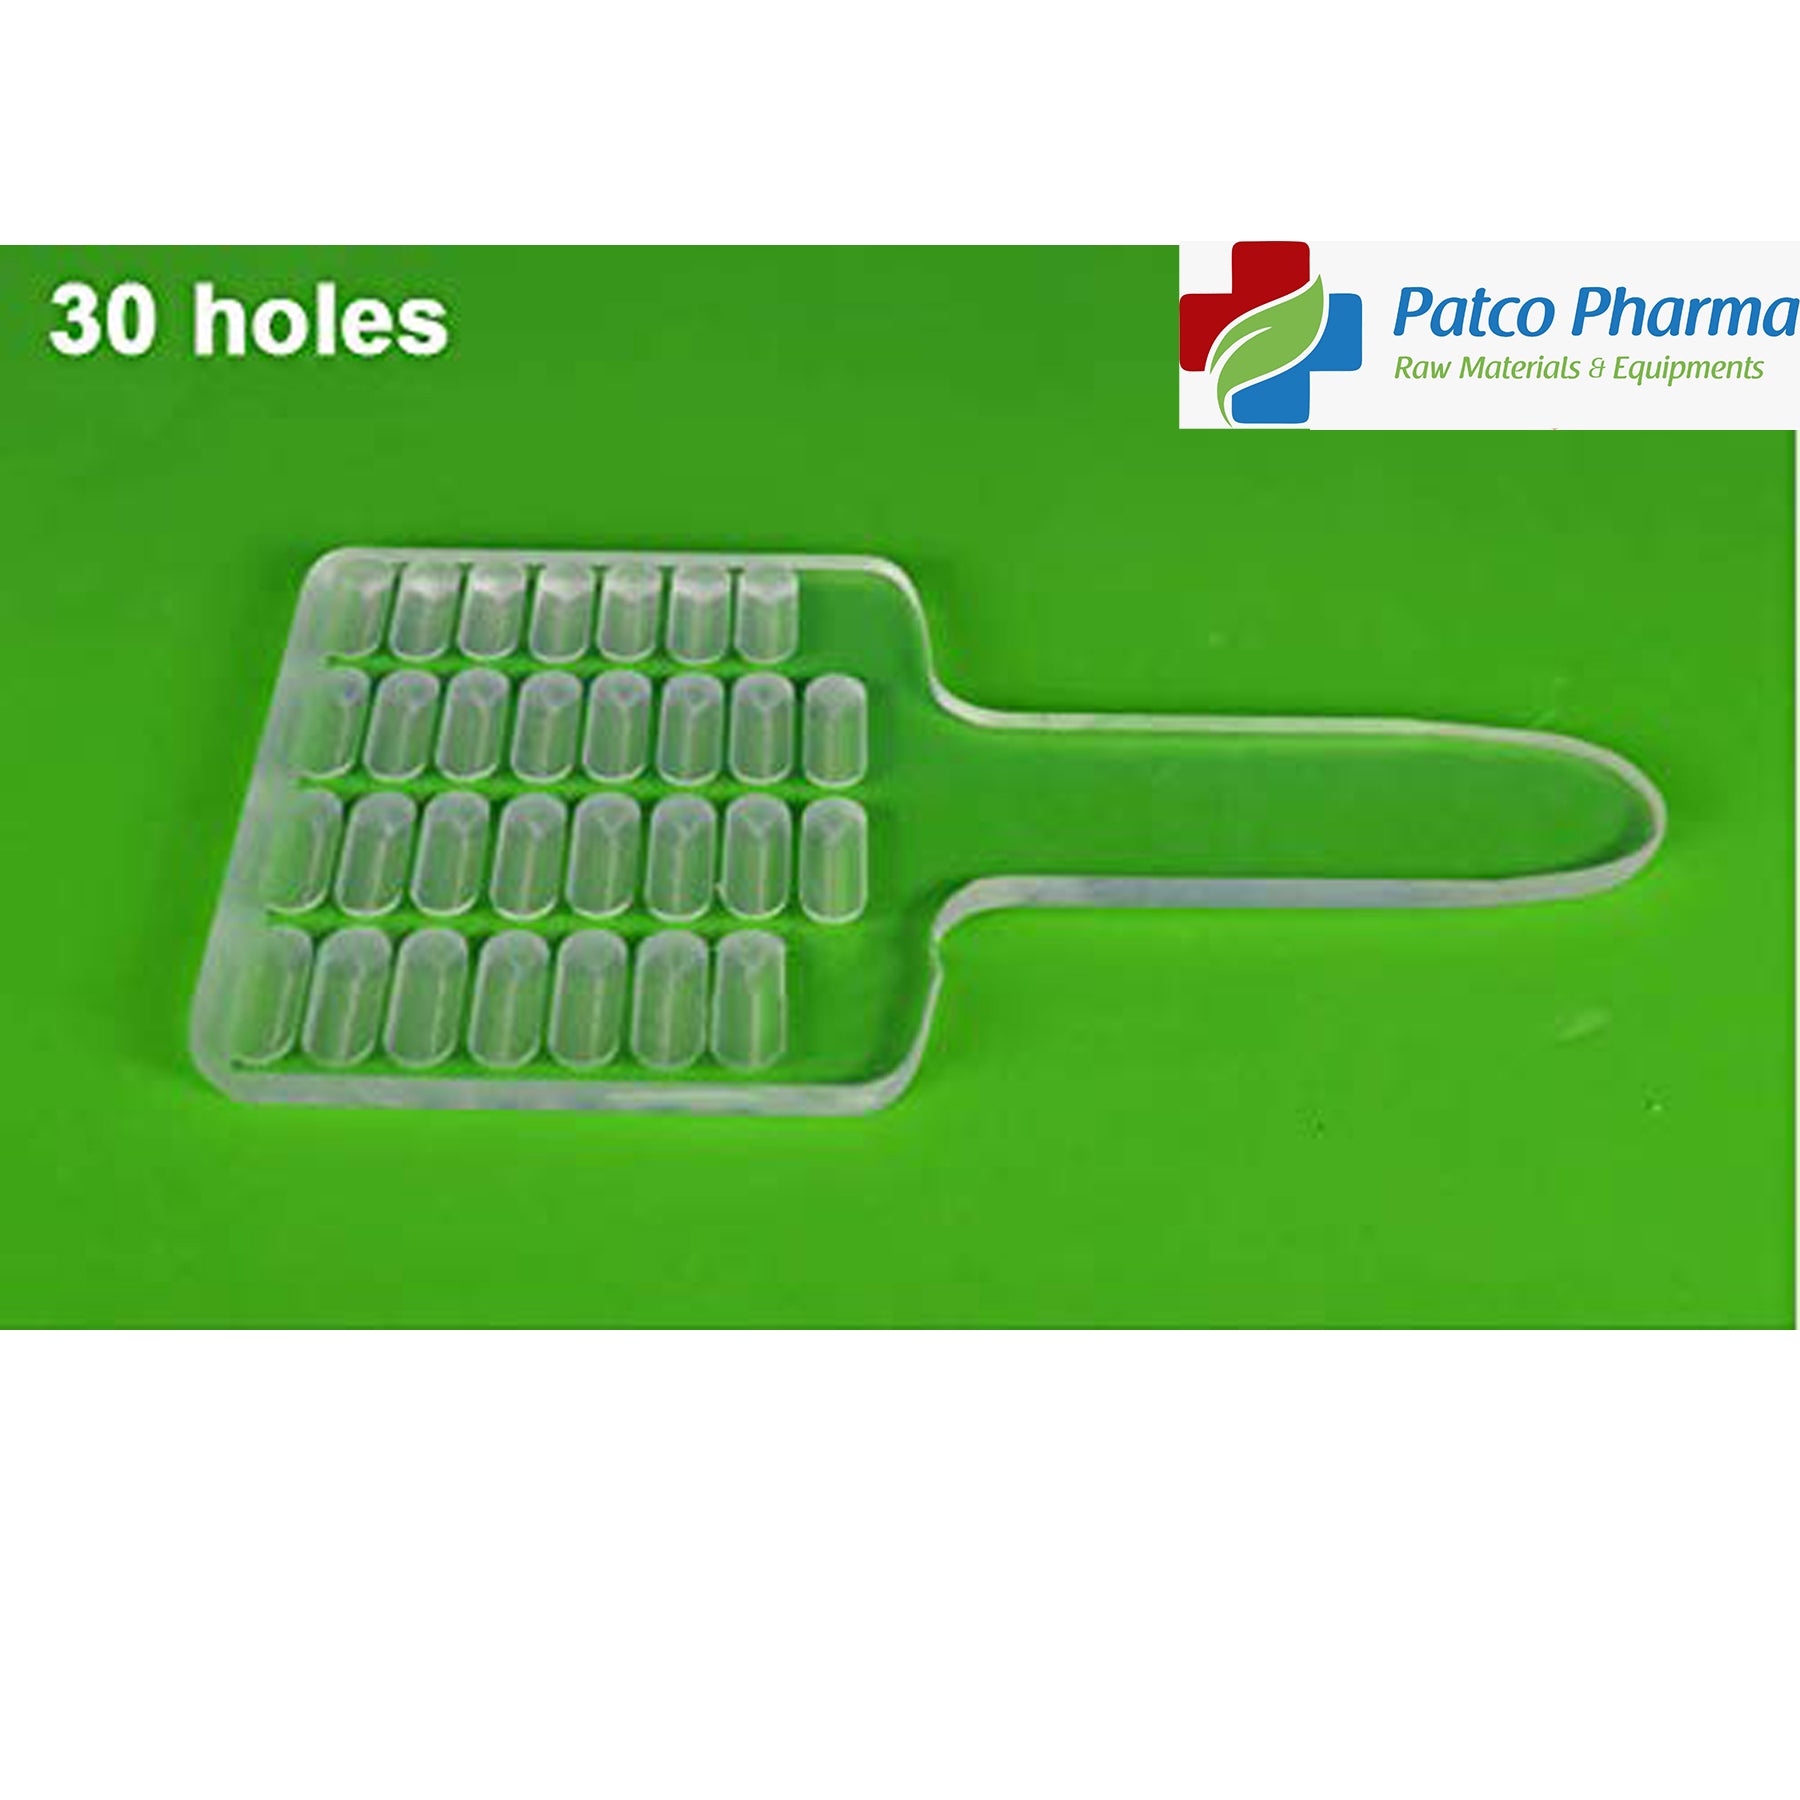 Manual Capsule Counter Count Board/Tray For Size 0 (30 Holes Capsule Counter) Patco Pharma